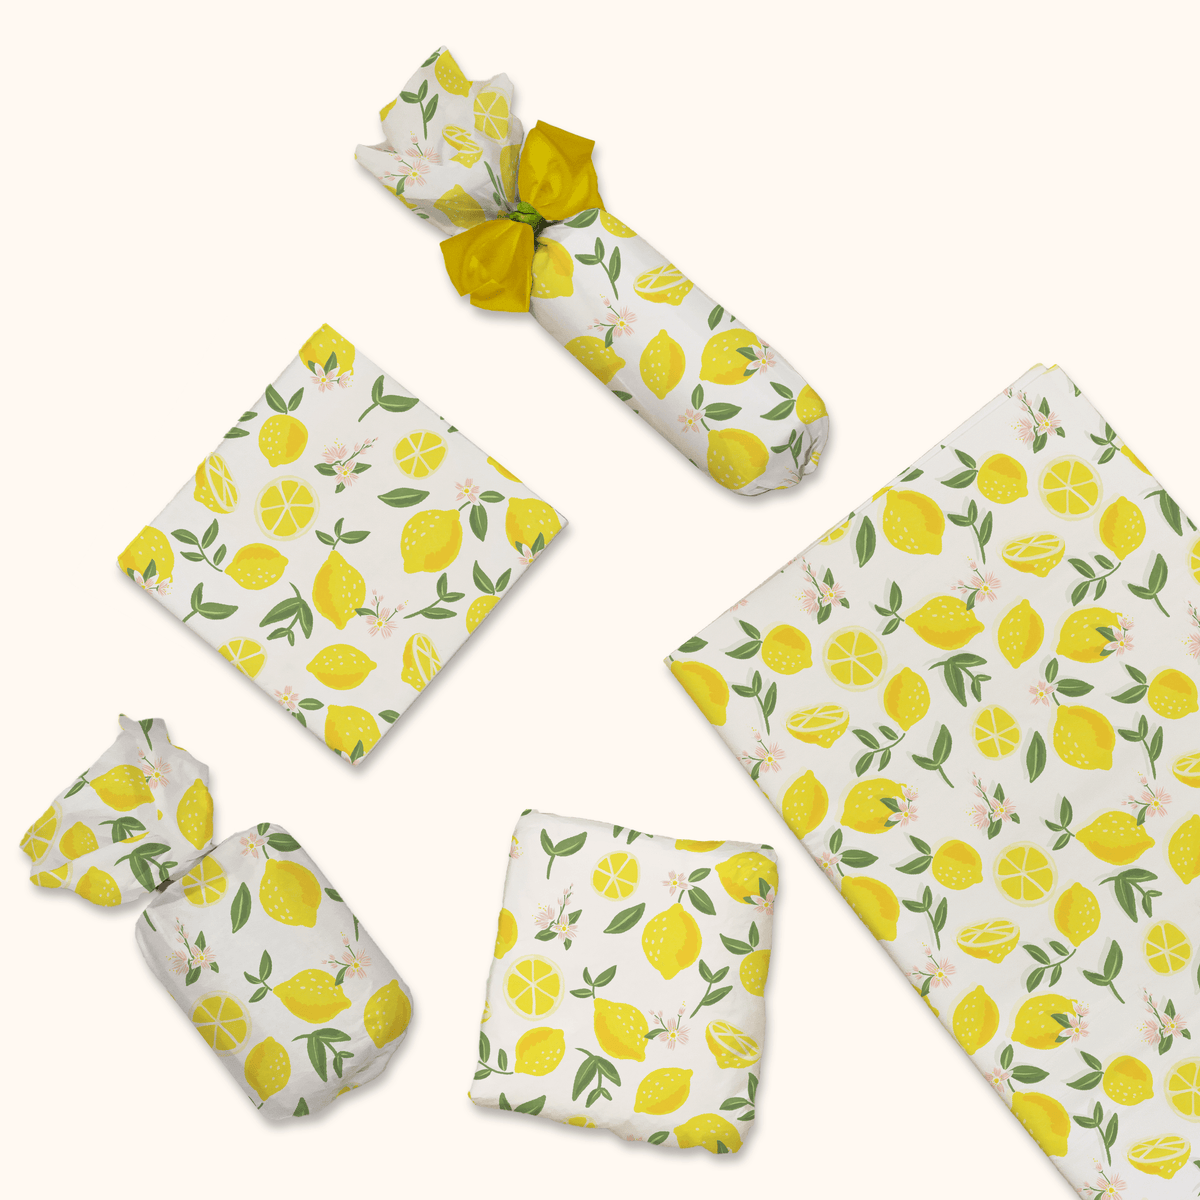 1pc 120g Paper Gift Bag, Modern Lemon Print Gift Wrapping Bag For Party